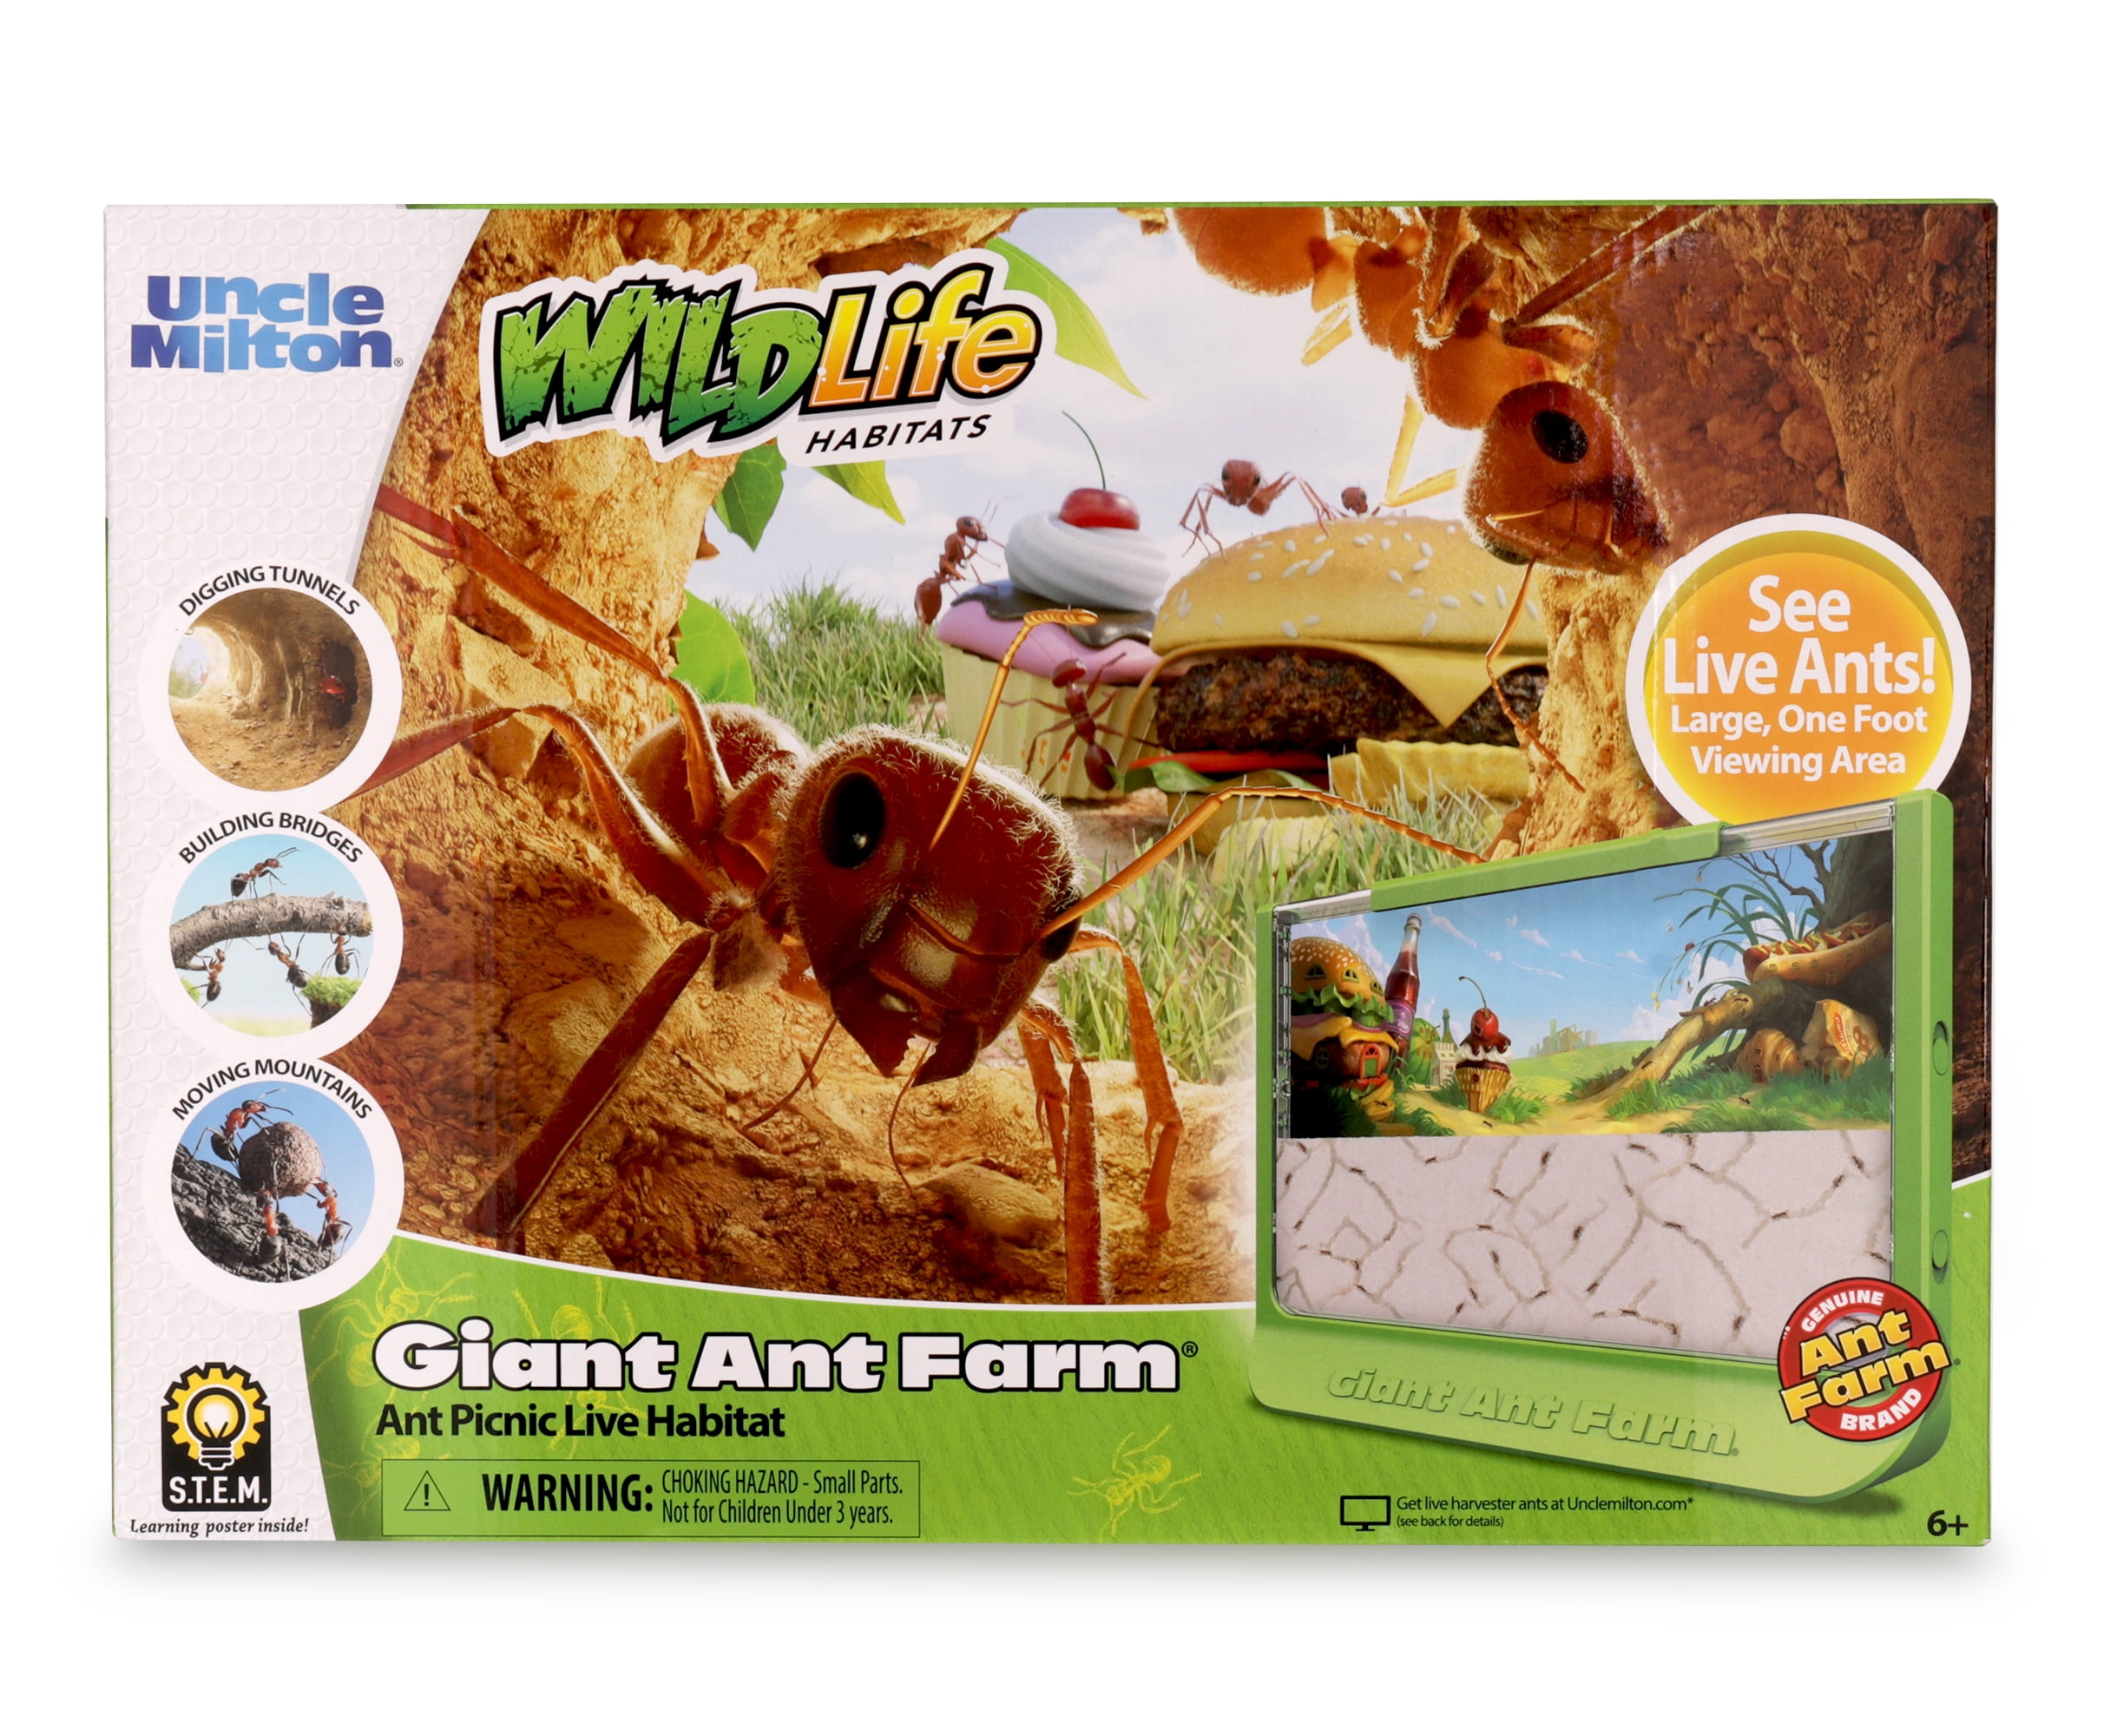 Educational 30 Ants Included Science hand made classic wood Giant Ant Farm 